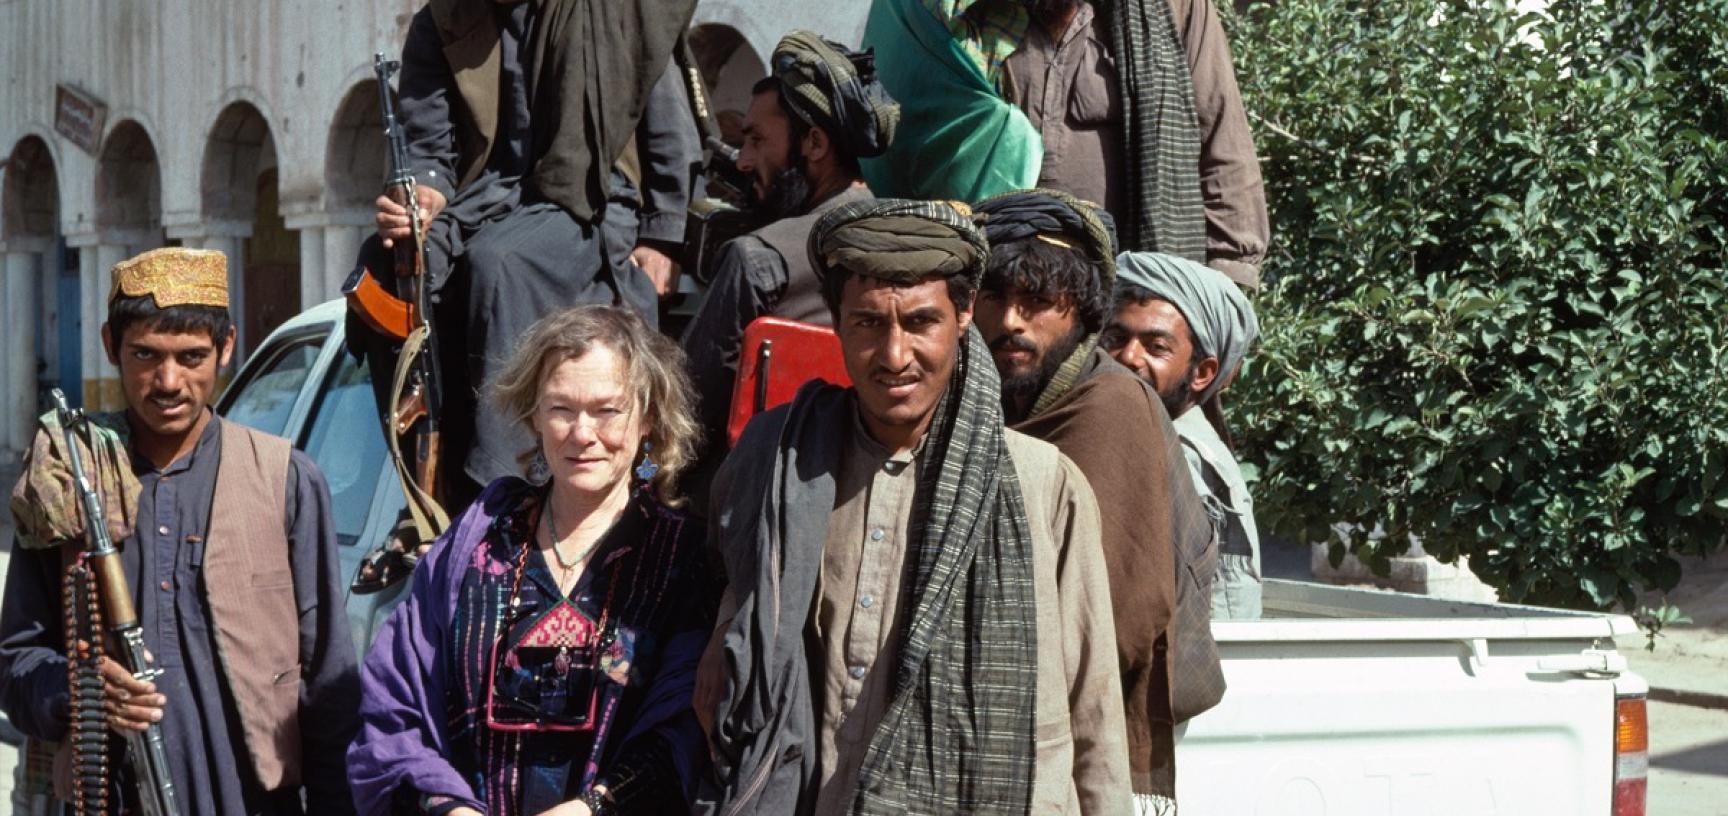 Sheila Paine with a group of mujahideen